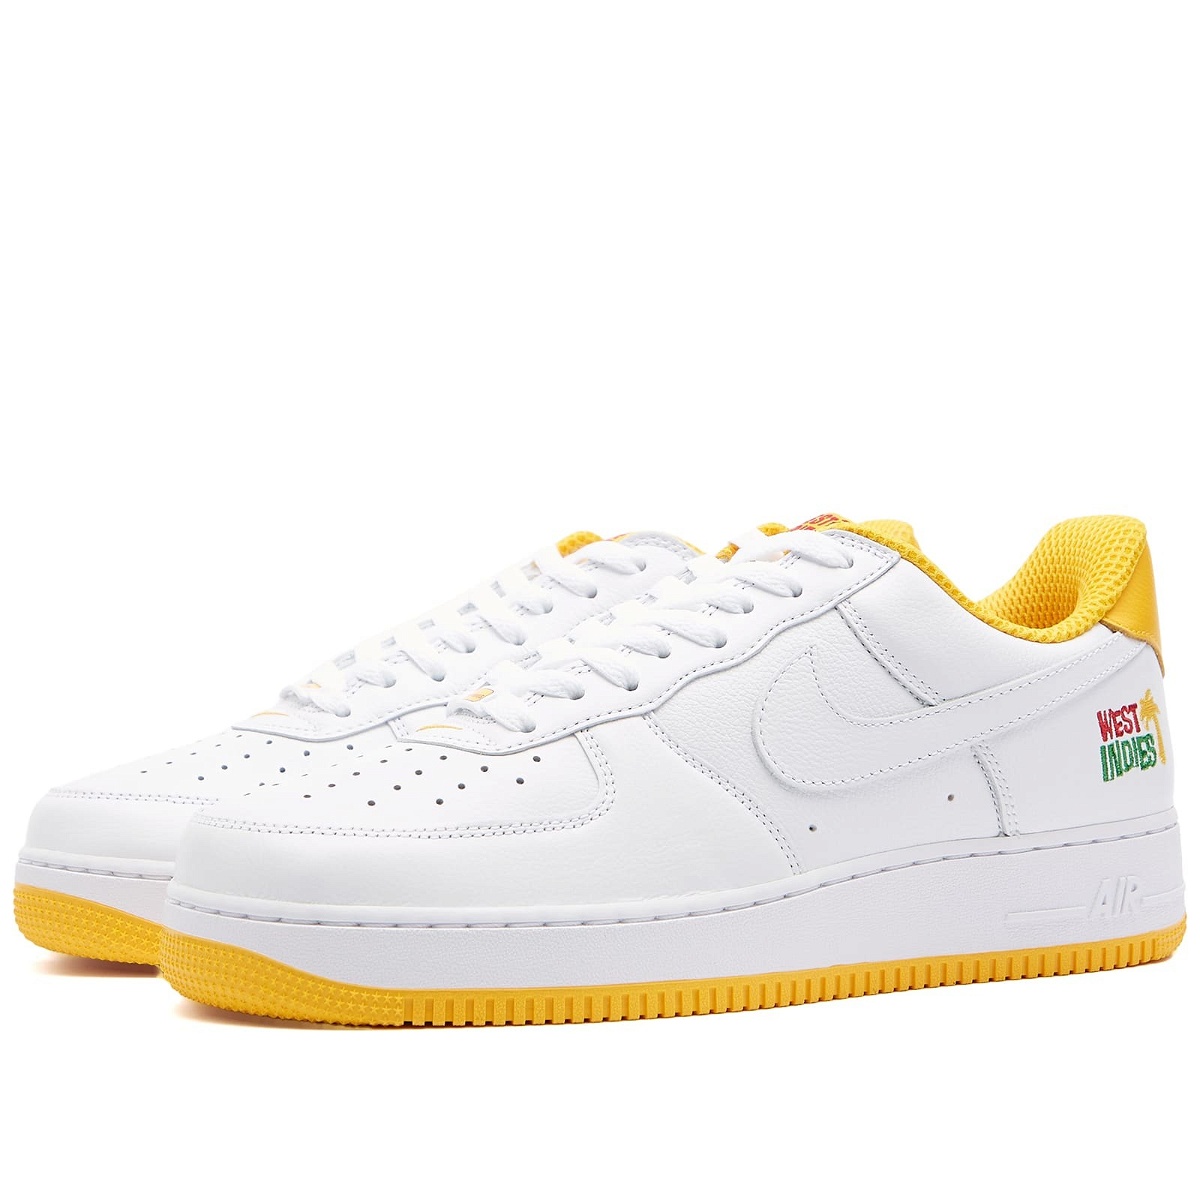 Photo: Nike Air Force 1 Low Retro QS Sneakers in White/Gold